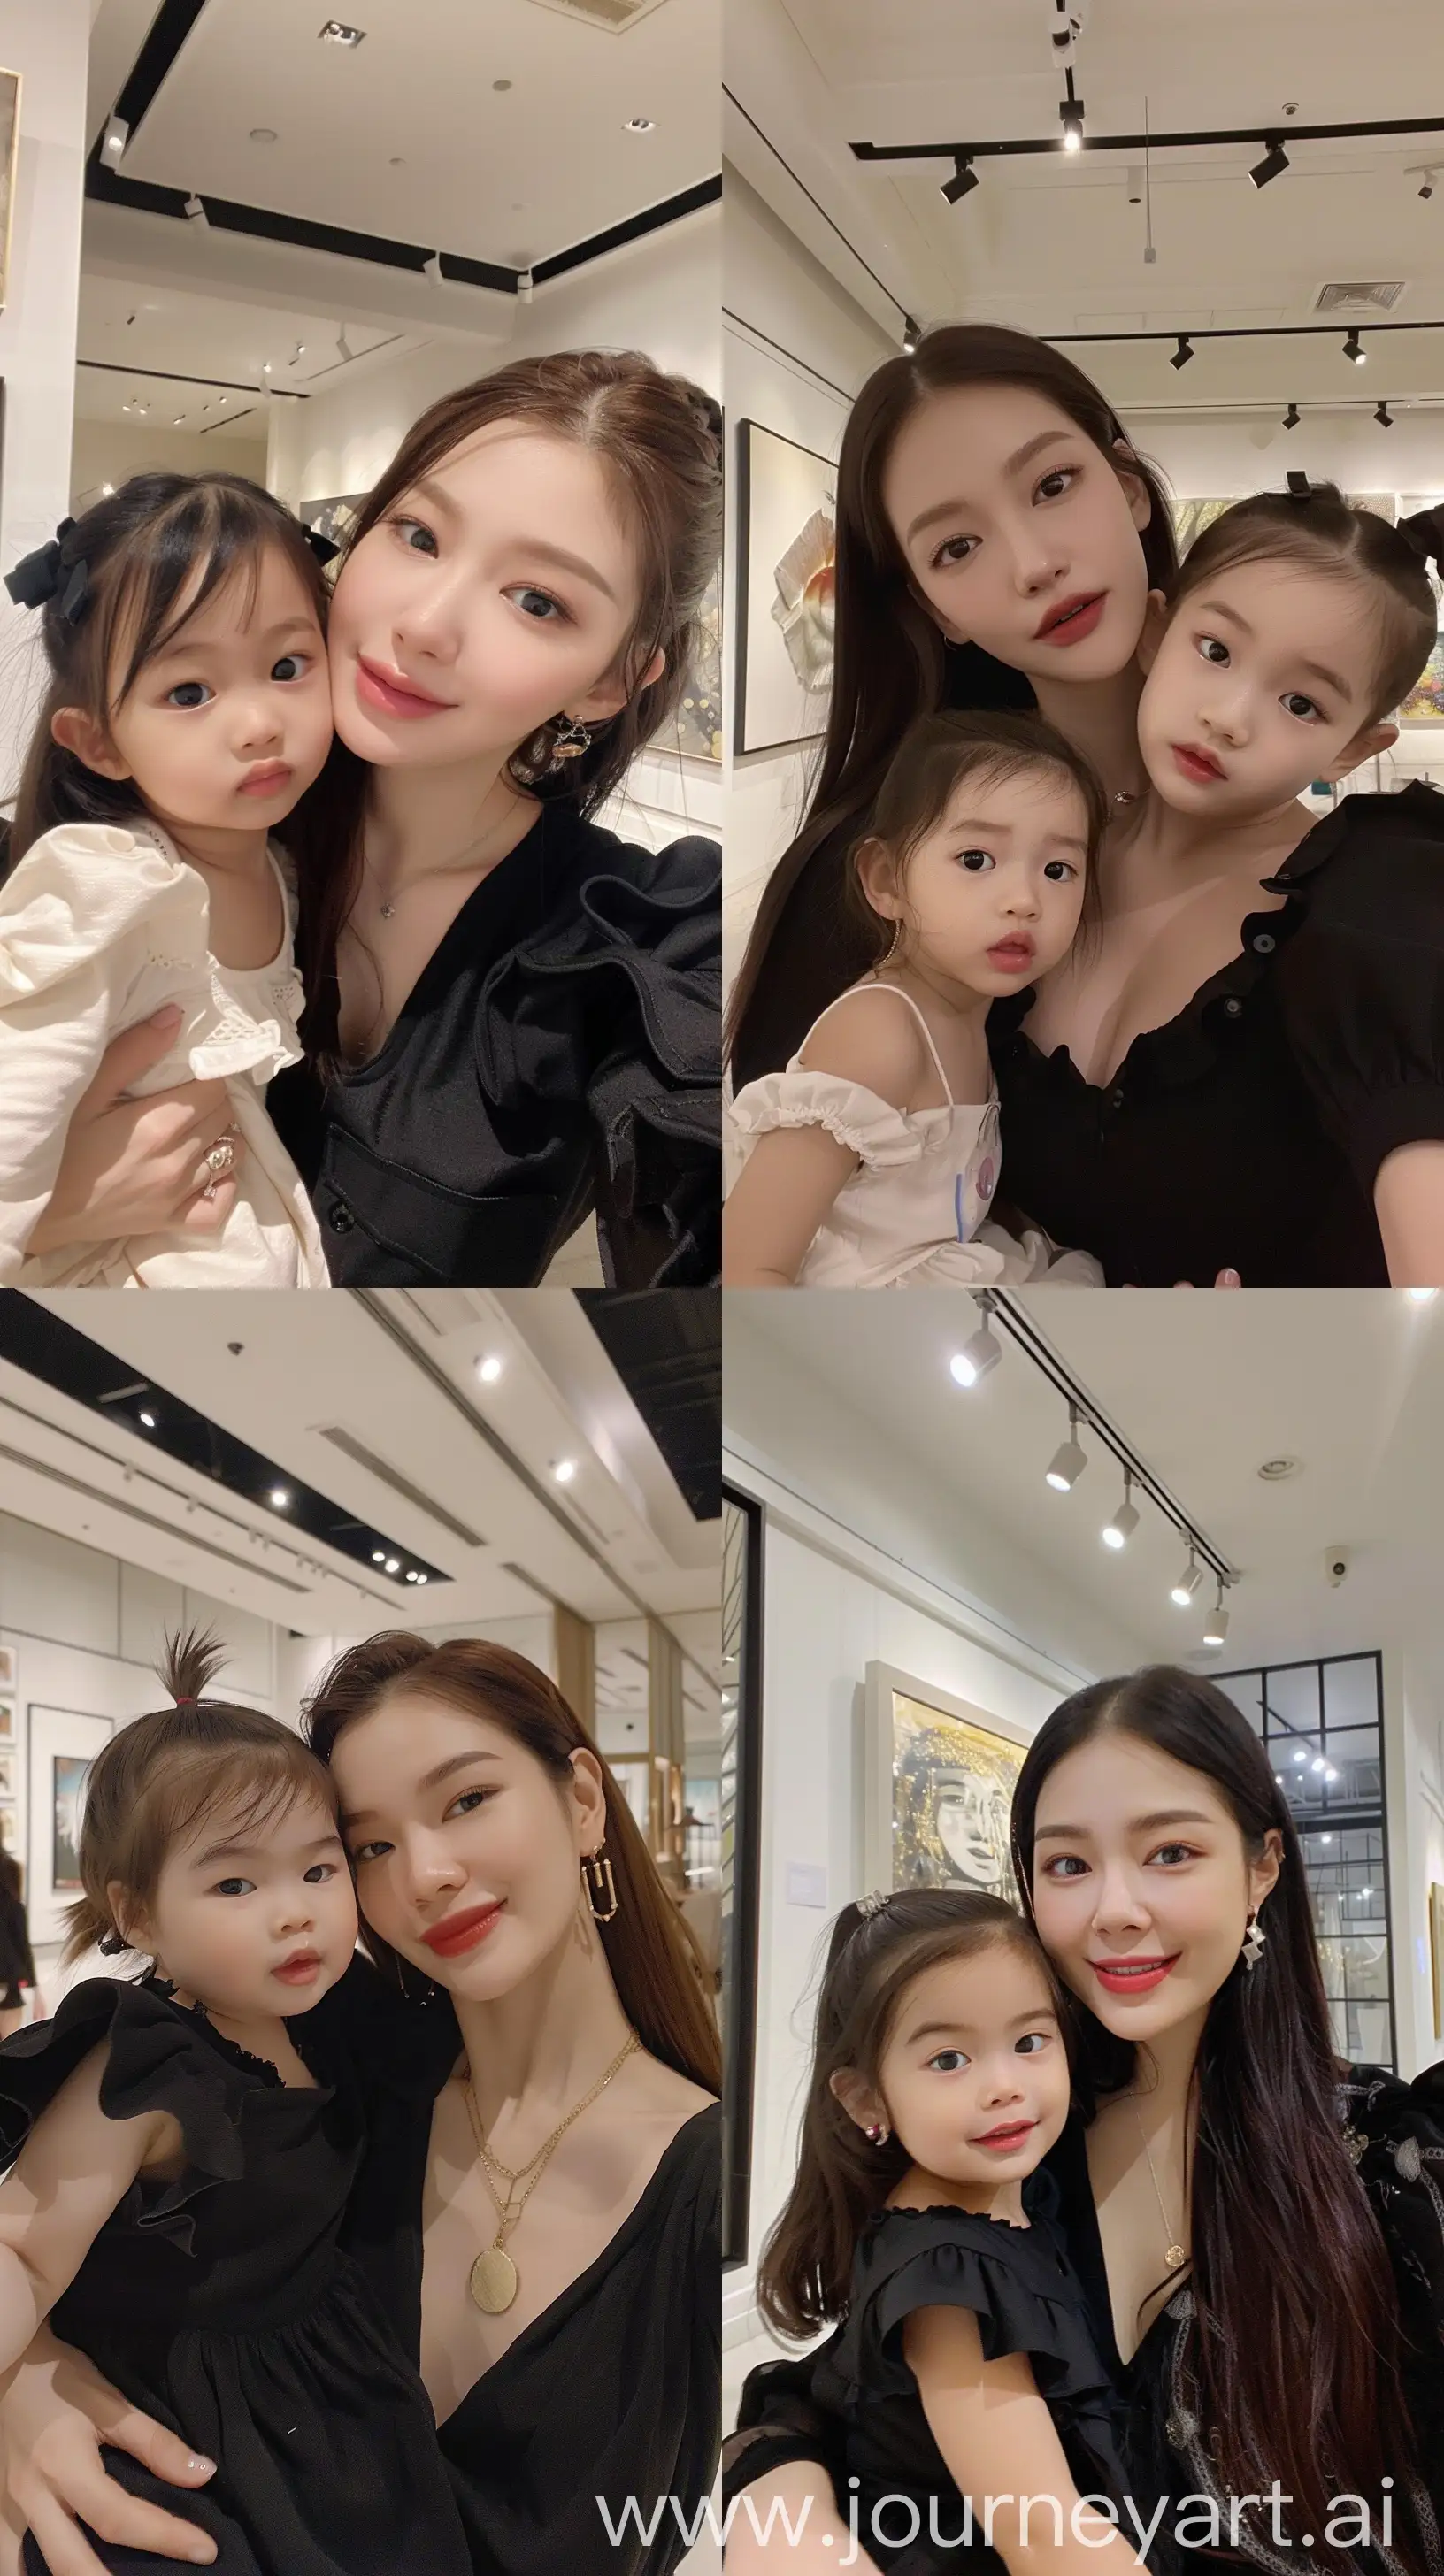 blackpink's jennie selfie with 2 years old  girl, facial feature look a like blackpink's jennie, aestethic selfie, inside modern art gallery, night times, aestethic make up,hotly elegant young mom --ar 9:16 